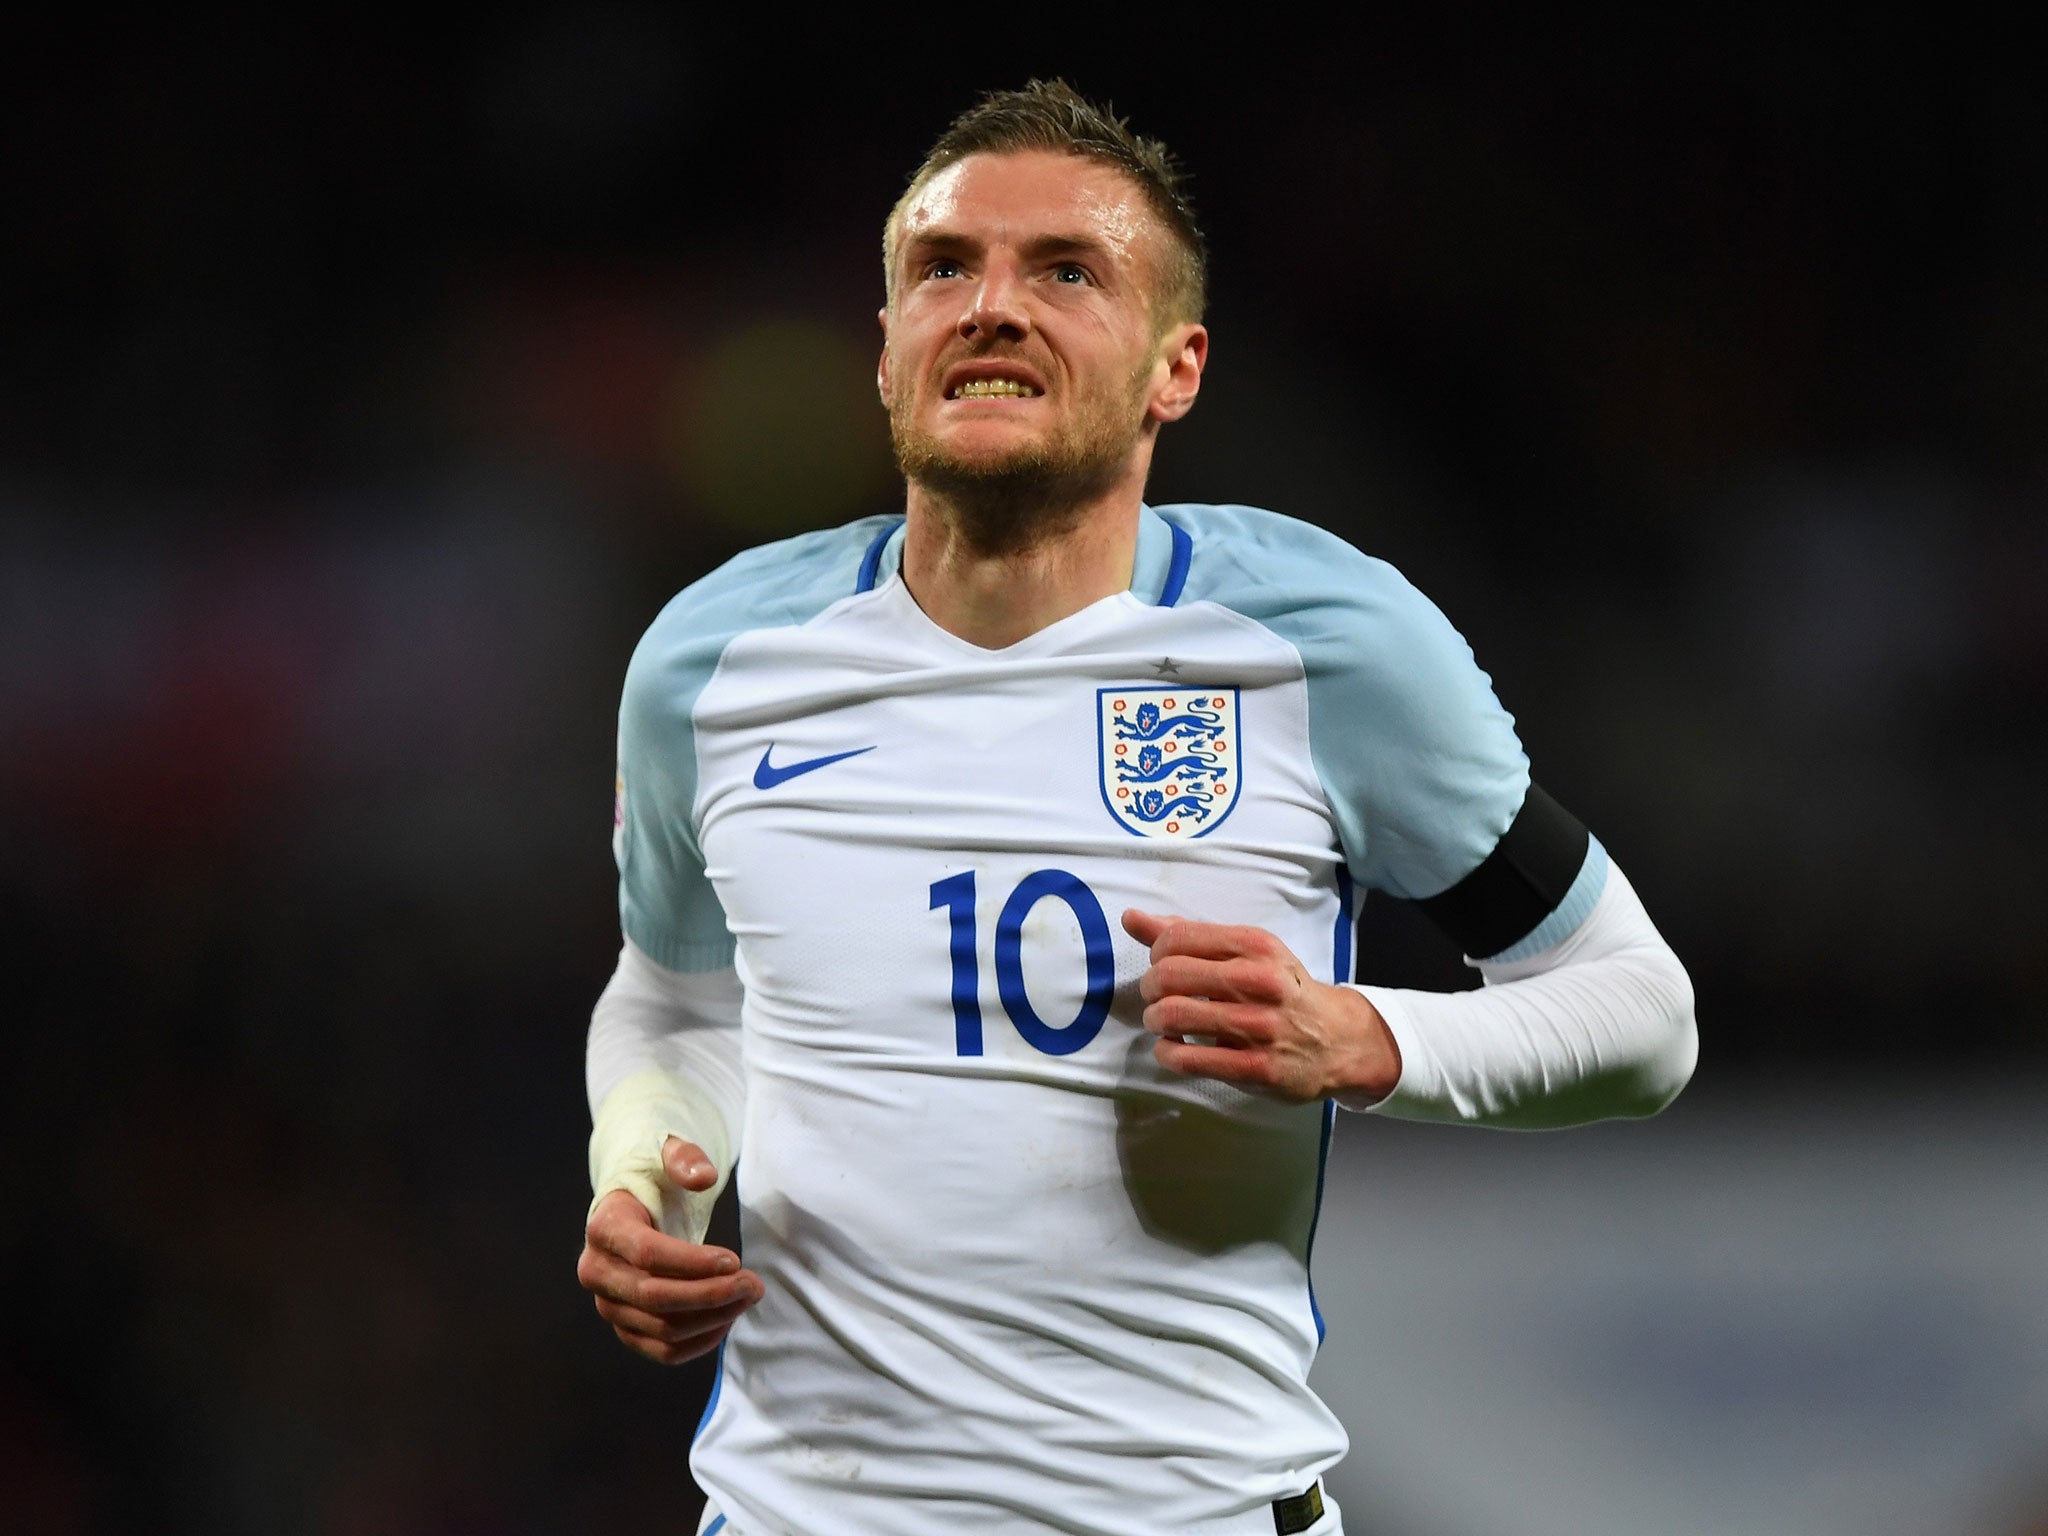 Jamie Vardy's international chances could be boosted by a move to Arsenal